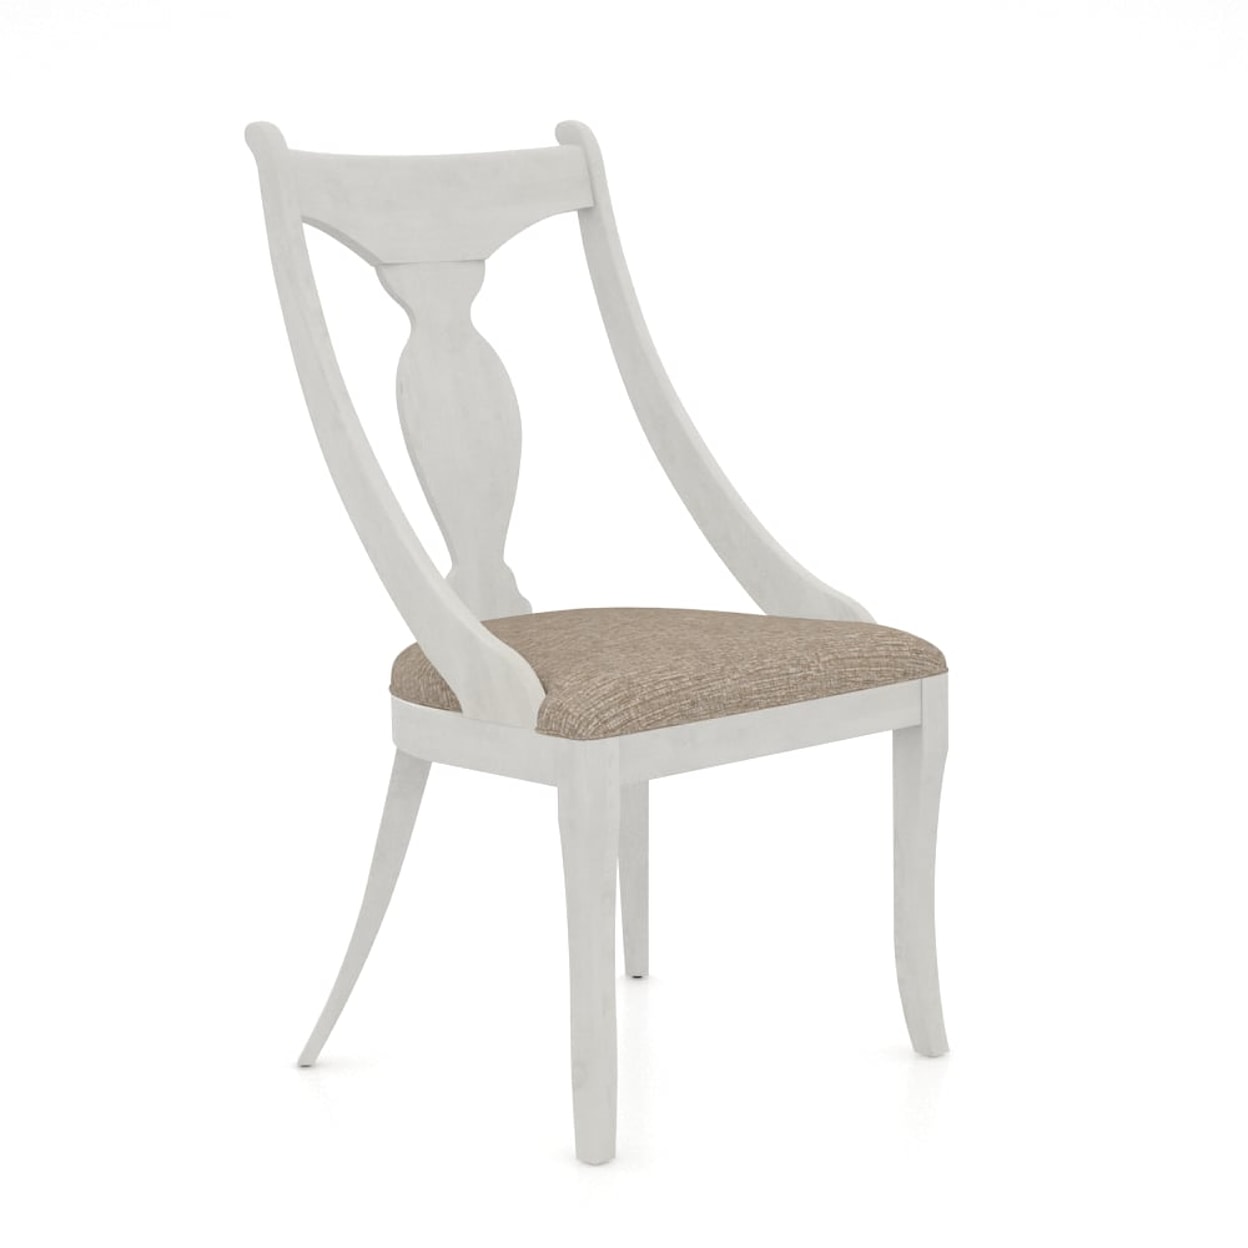 Canadel Farmhouse Customizable Dining Chair with Uph. Seat